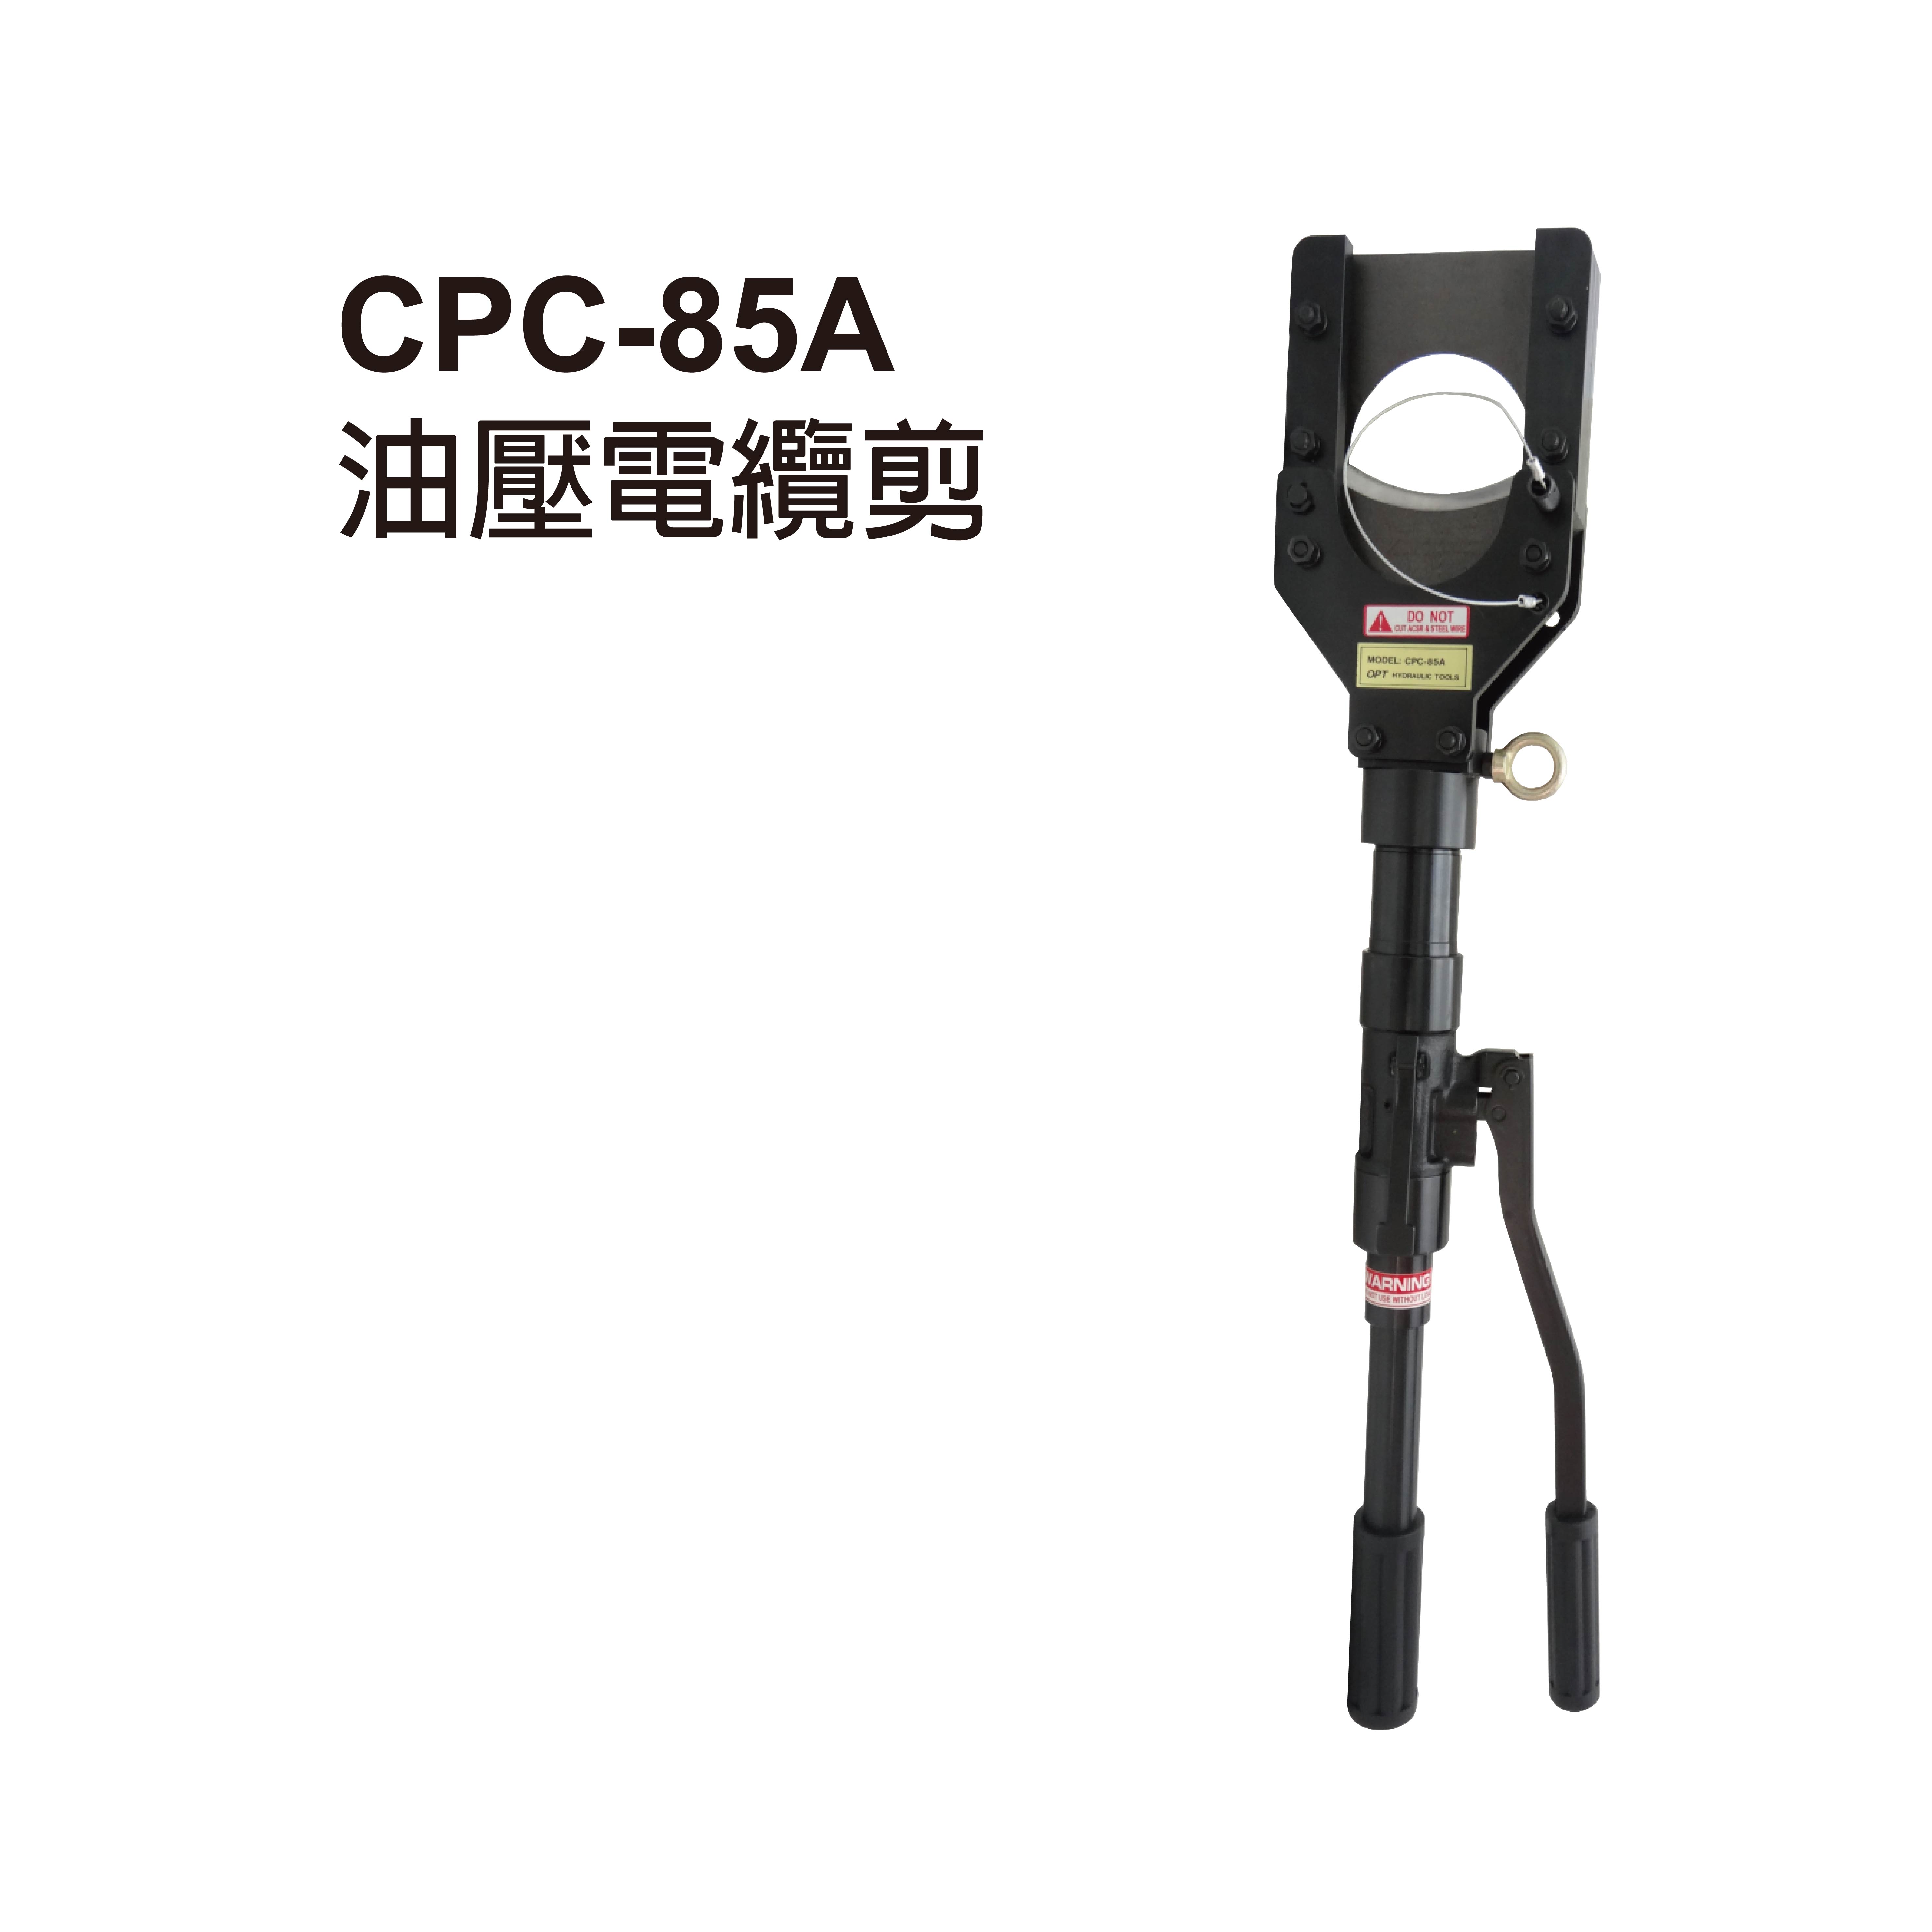 CPC-85A MANUAL HYDRAULIC CABLE CUTTERS